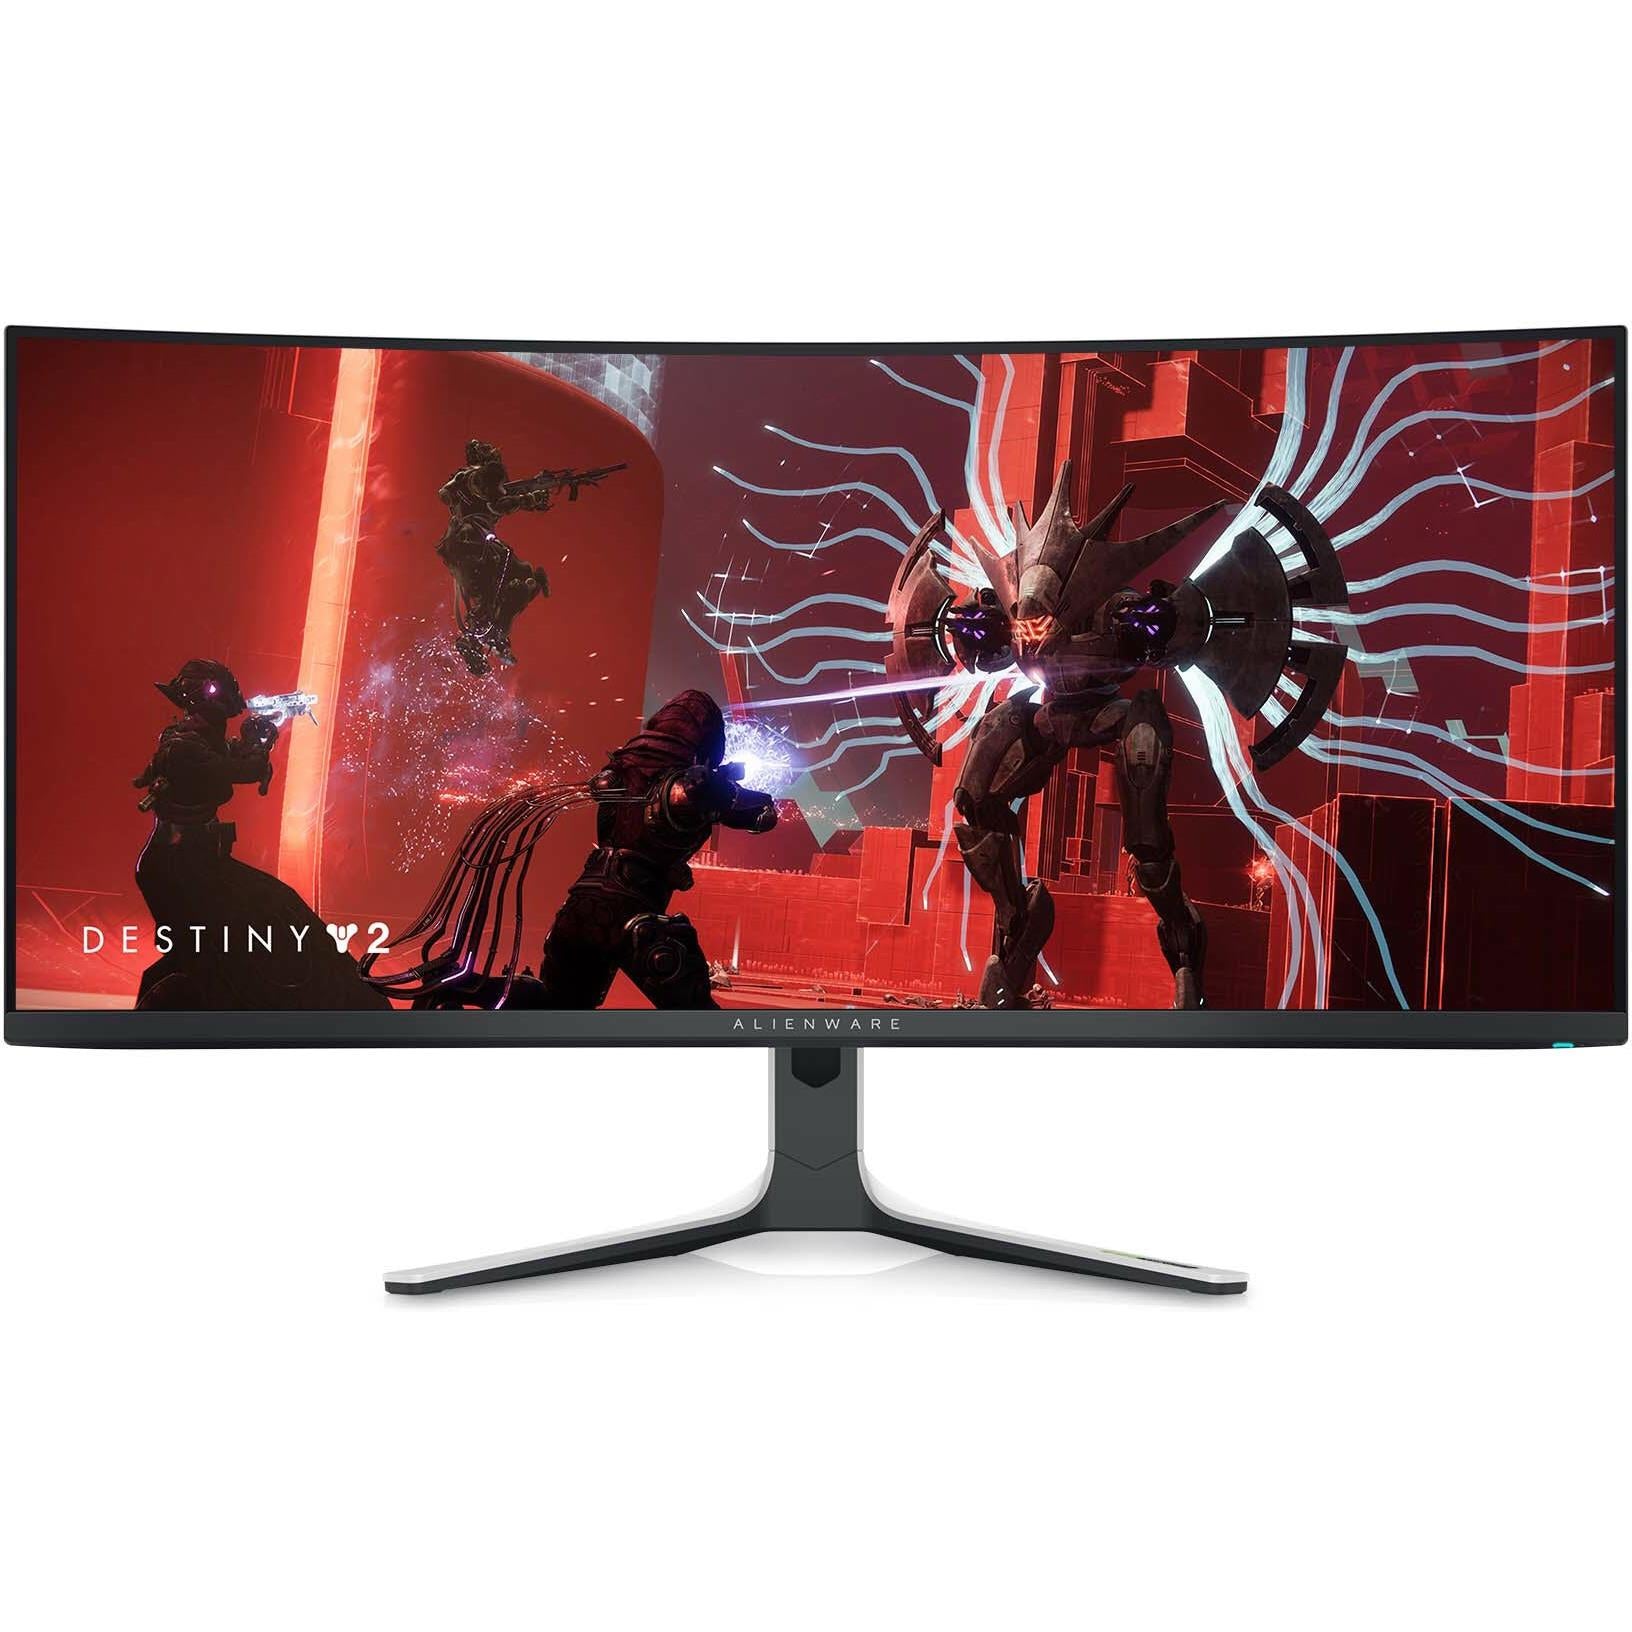 Alienware Aw3423dw Curved Gaming Monitor 34 18 Inch Quantom Dot Oled